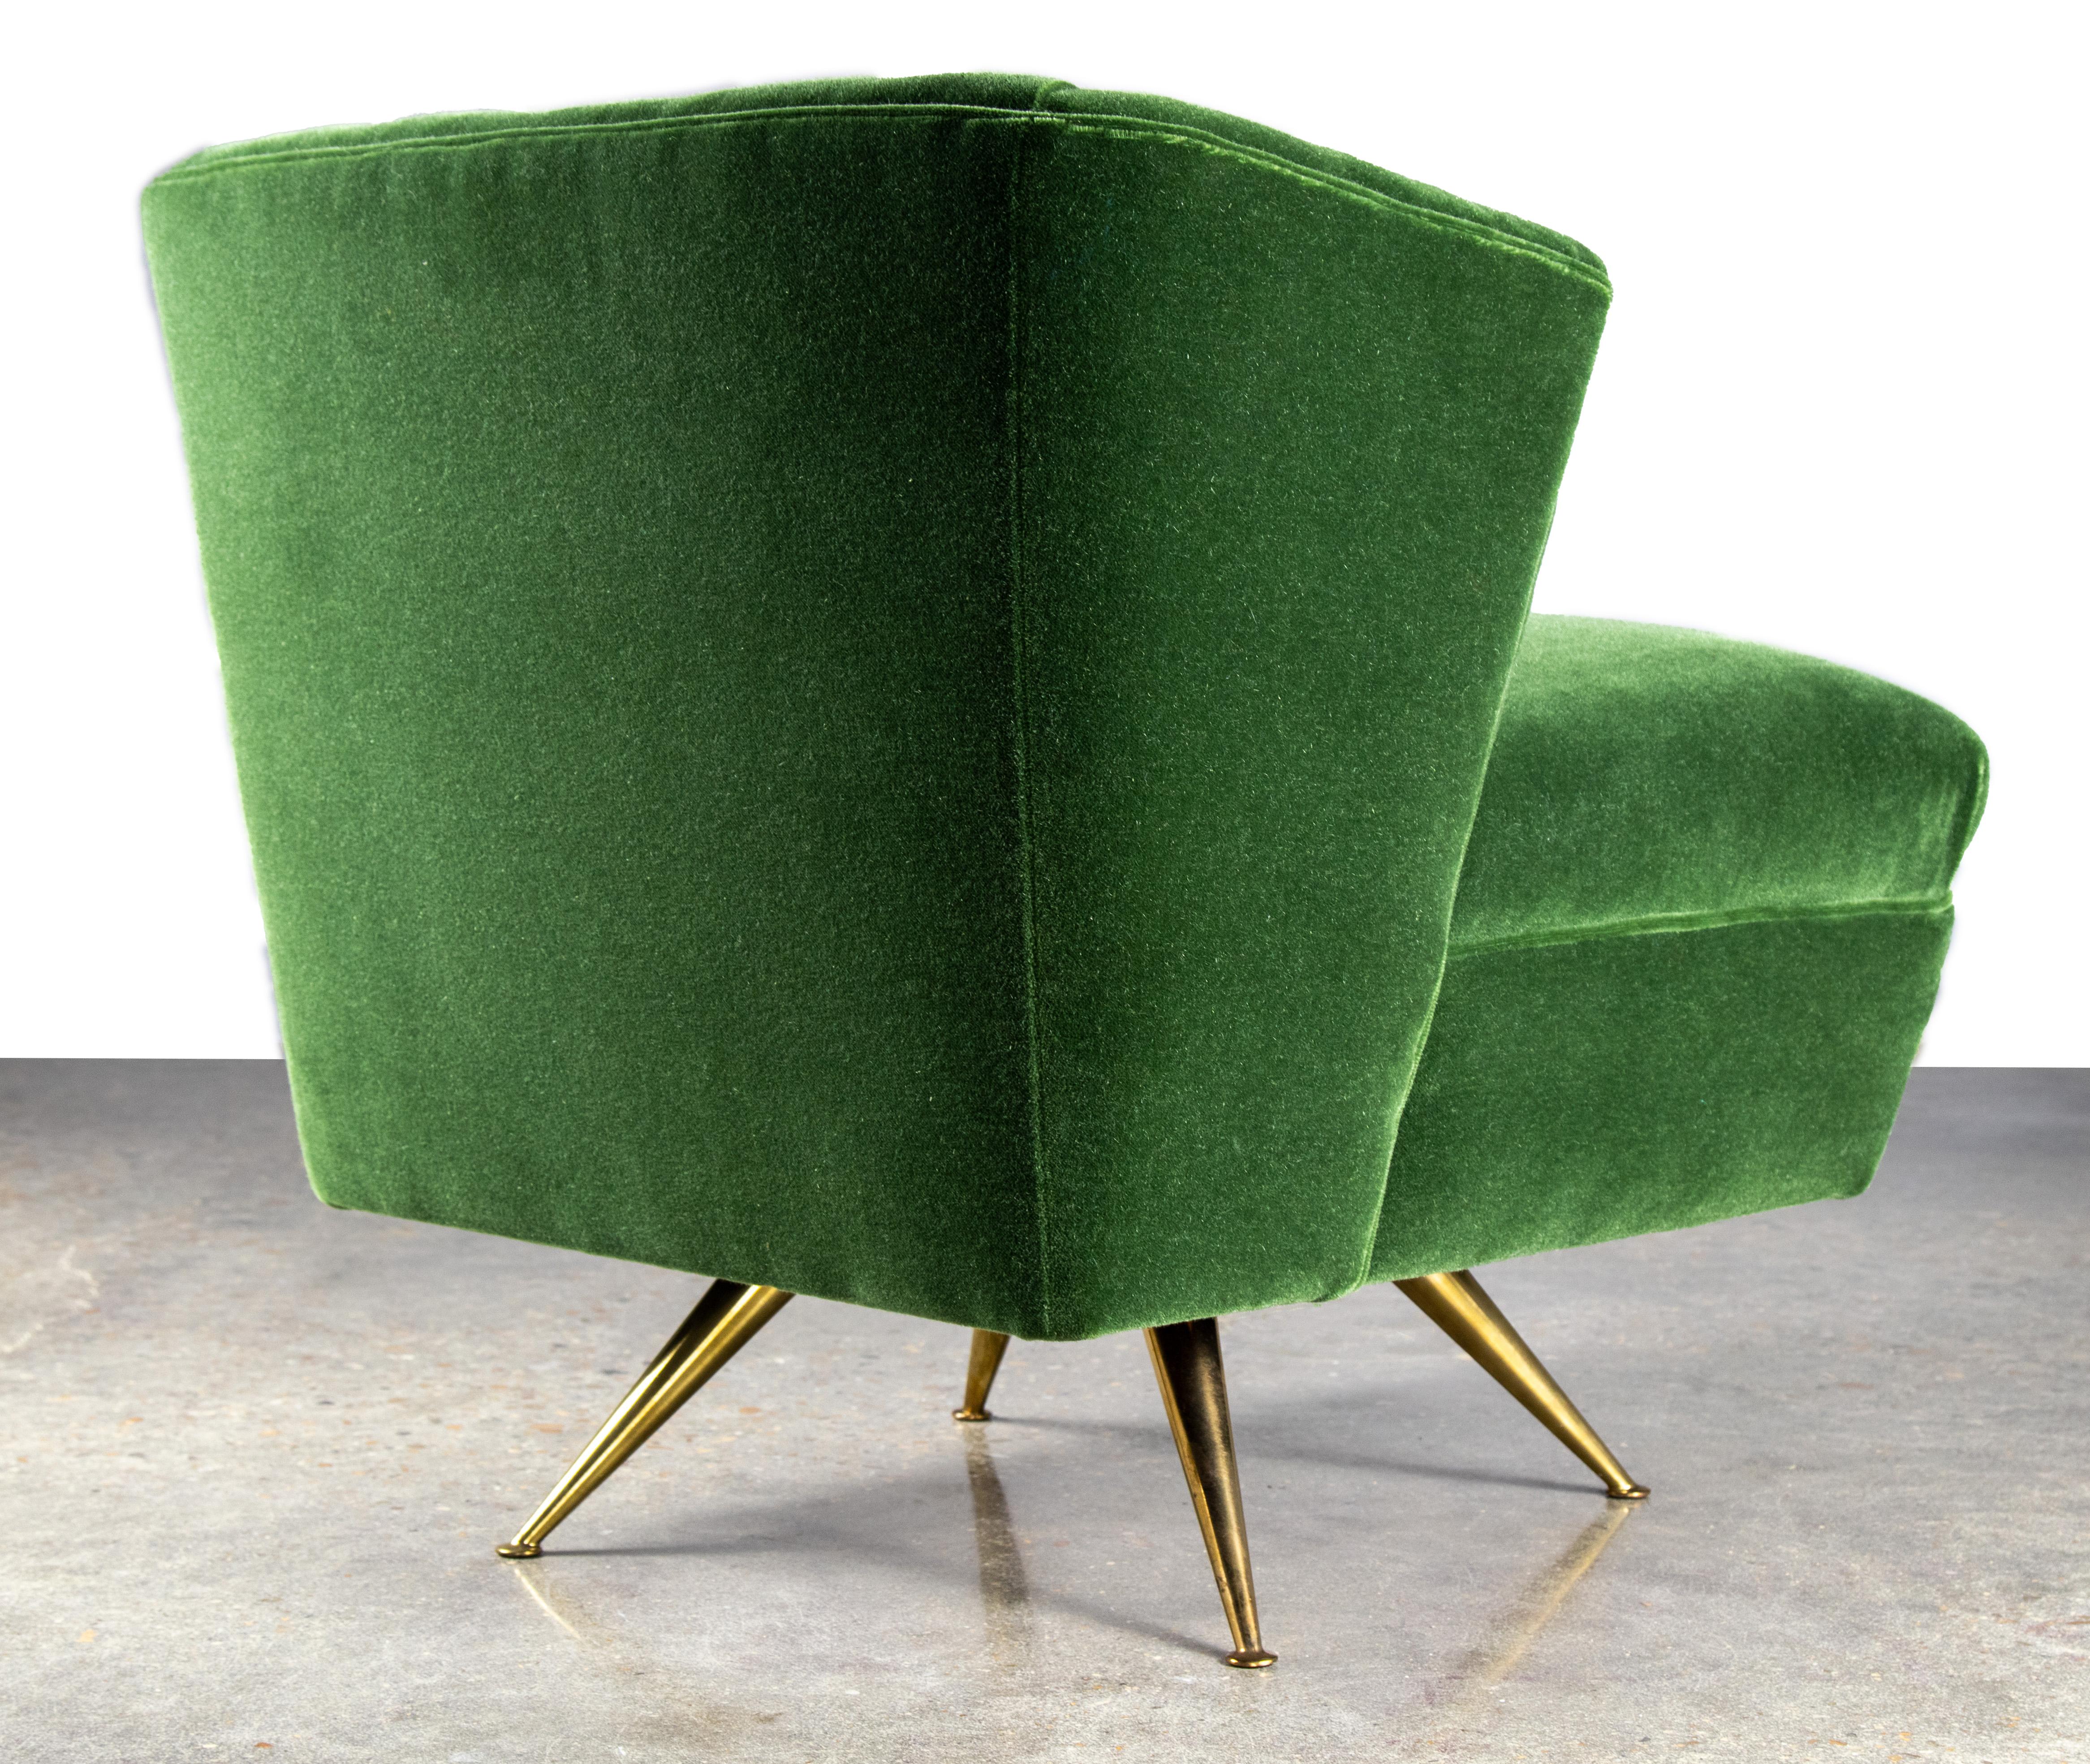 American 1950s Henry P Glass Swivel Lounge Chair Green Mohair on brass legs JL Chase Co. For Sale